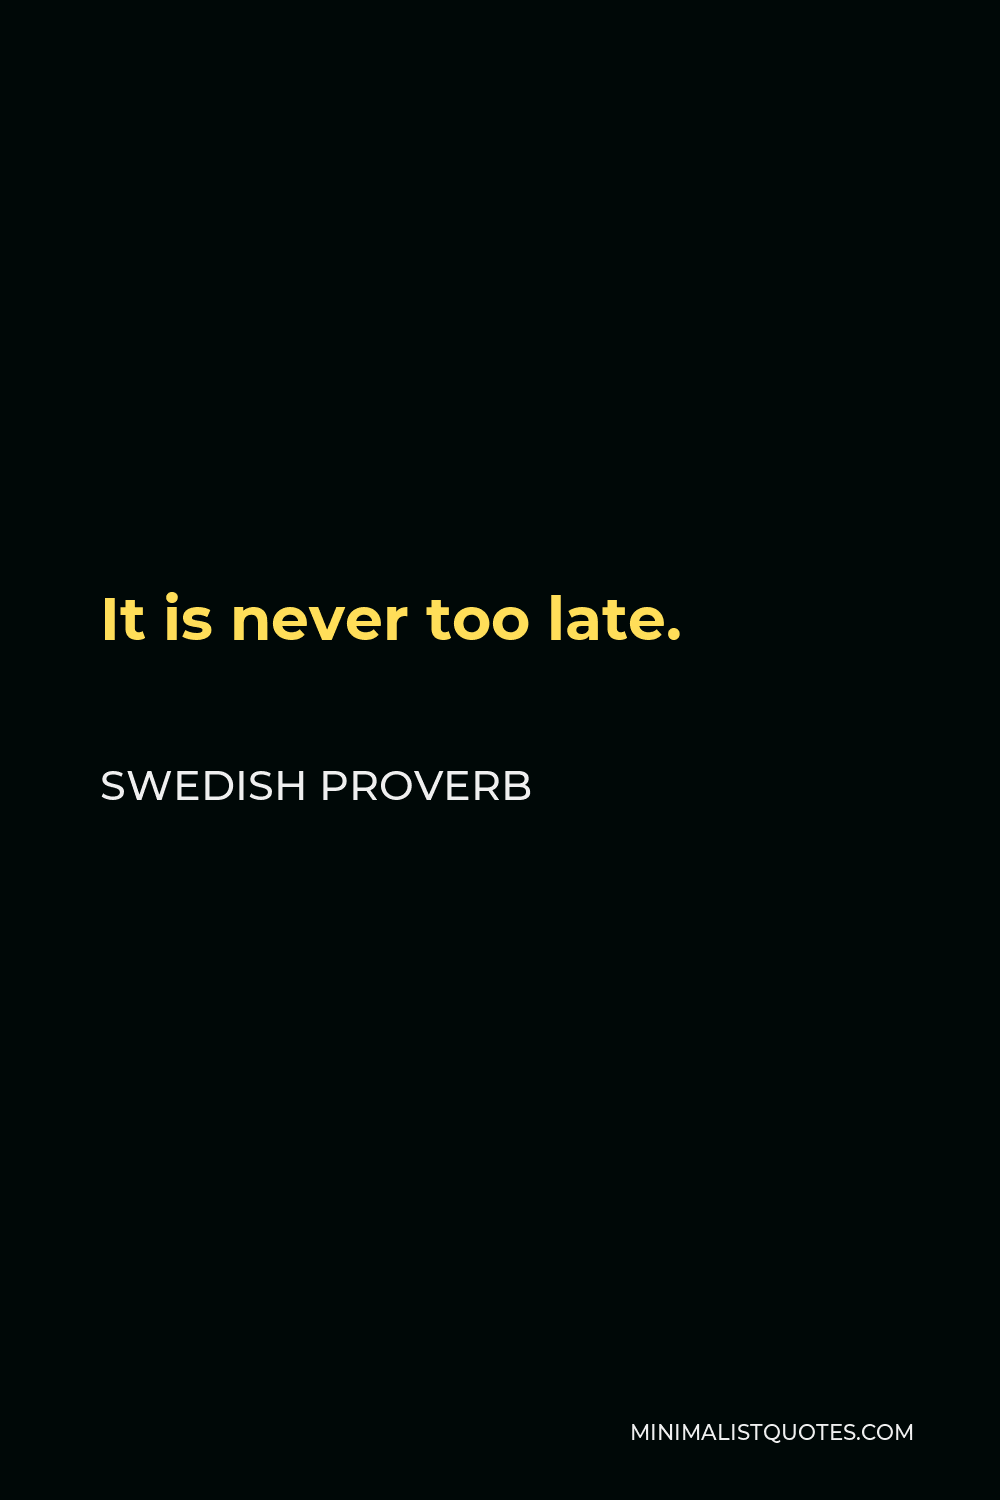 Swedish Proverb Quote - It is never too late.